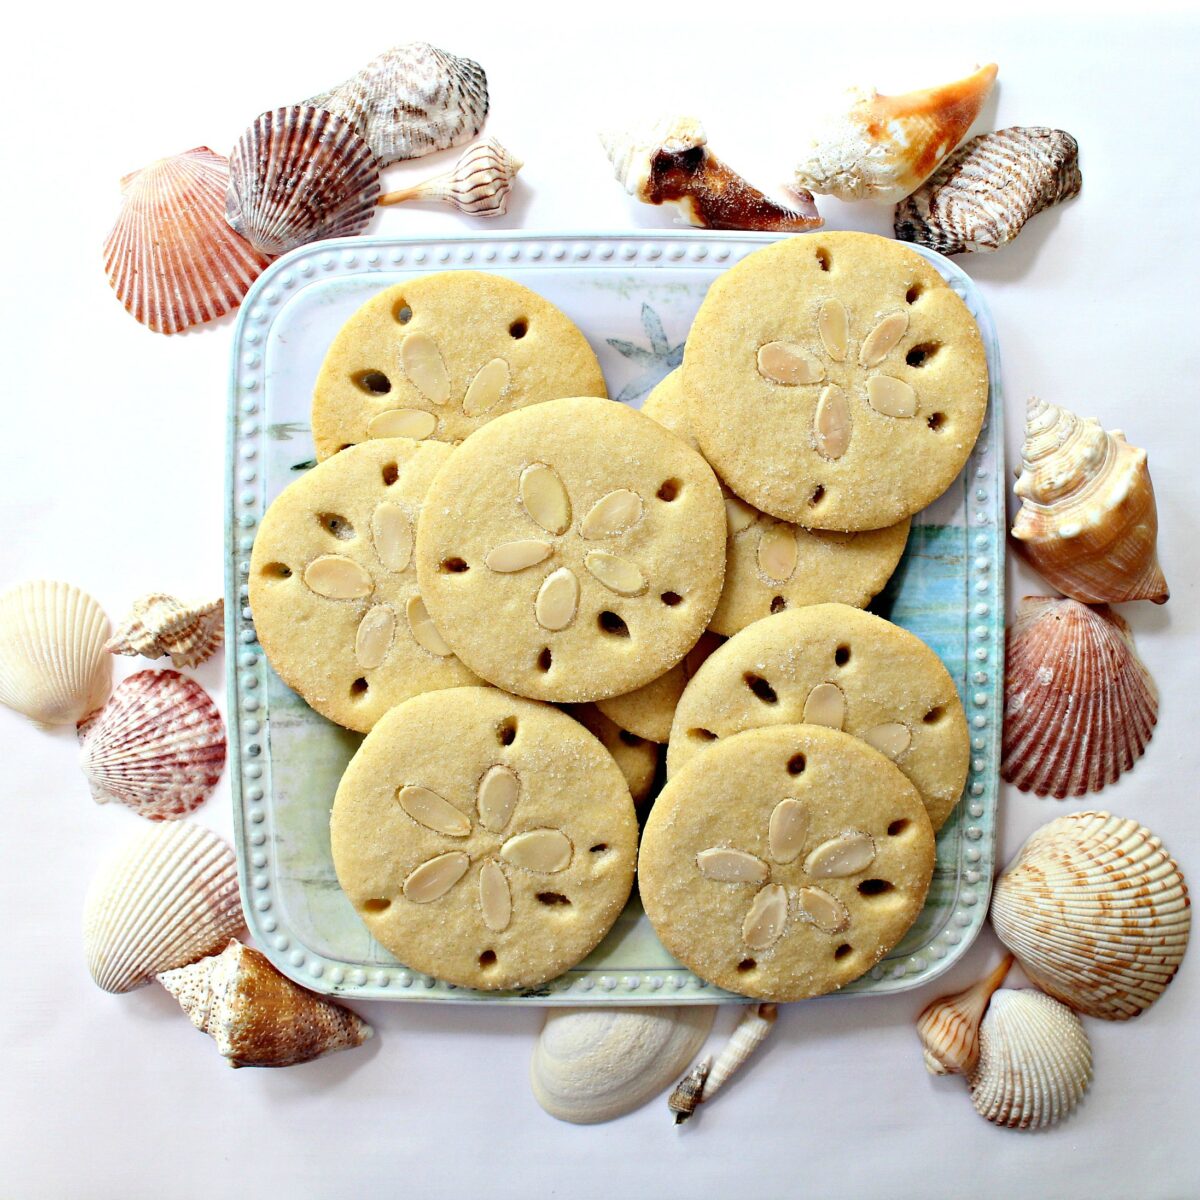 Plate of cookies surrounded by sea shells.